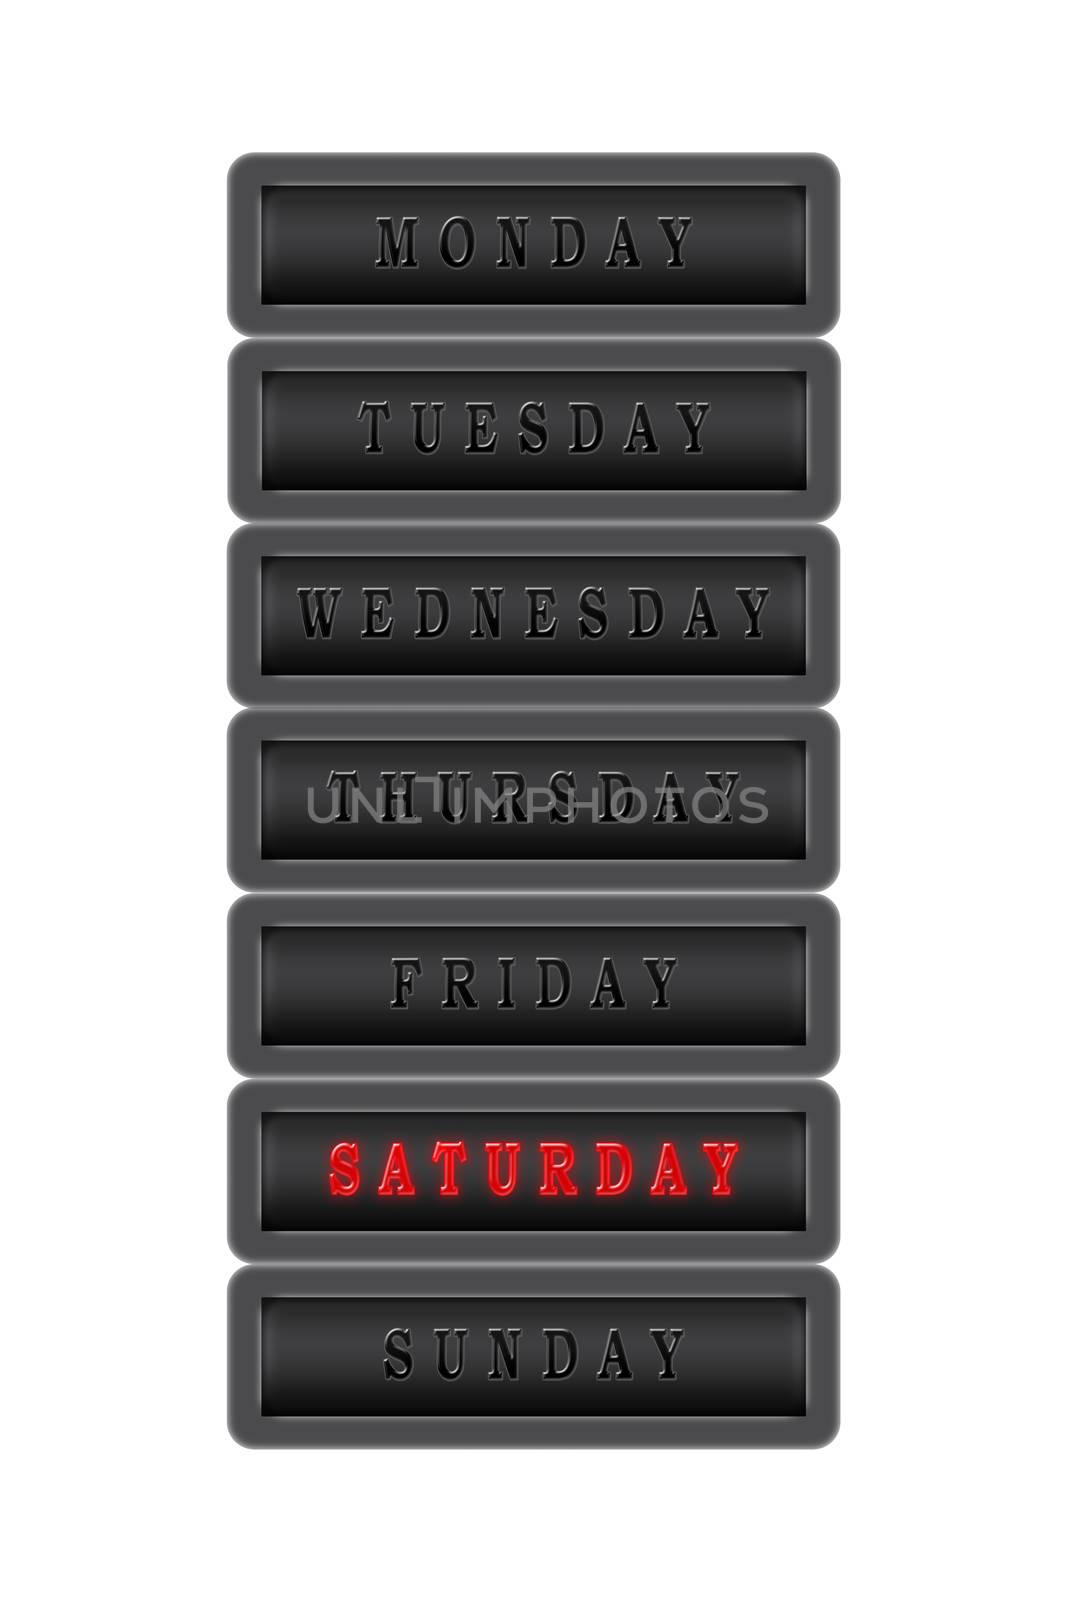 Among the list of days of the week, Saturday is highlighted in red on a dark background.  The rest of the days are black on a dark background.